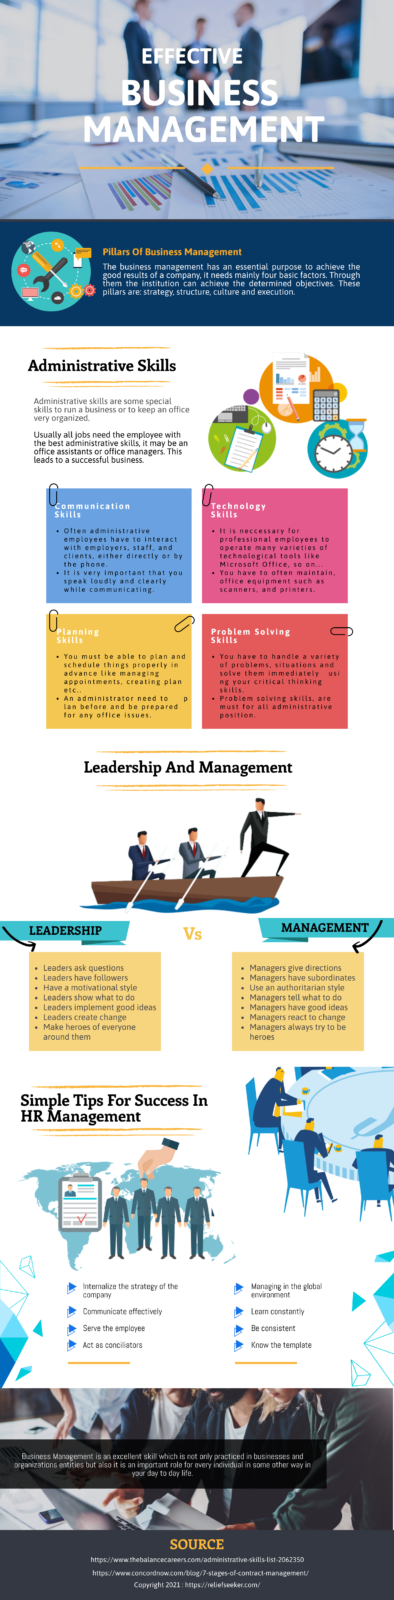 Infographic about Effective Business Management, covering details on administrative skills, leadership vs. management, and simple tips for success in HR Management. Created by guest blogger Caroline from Reliefseeker.